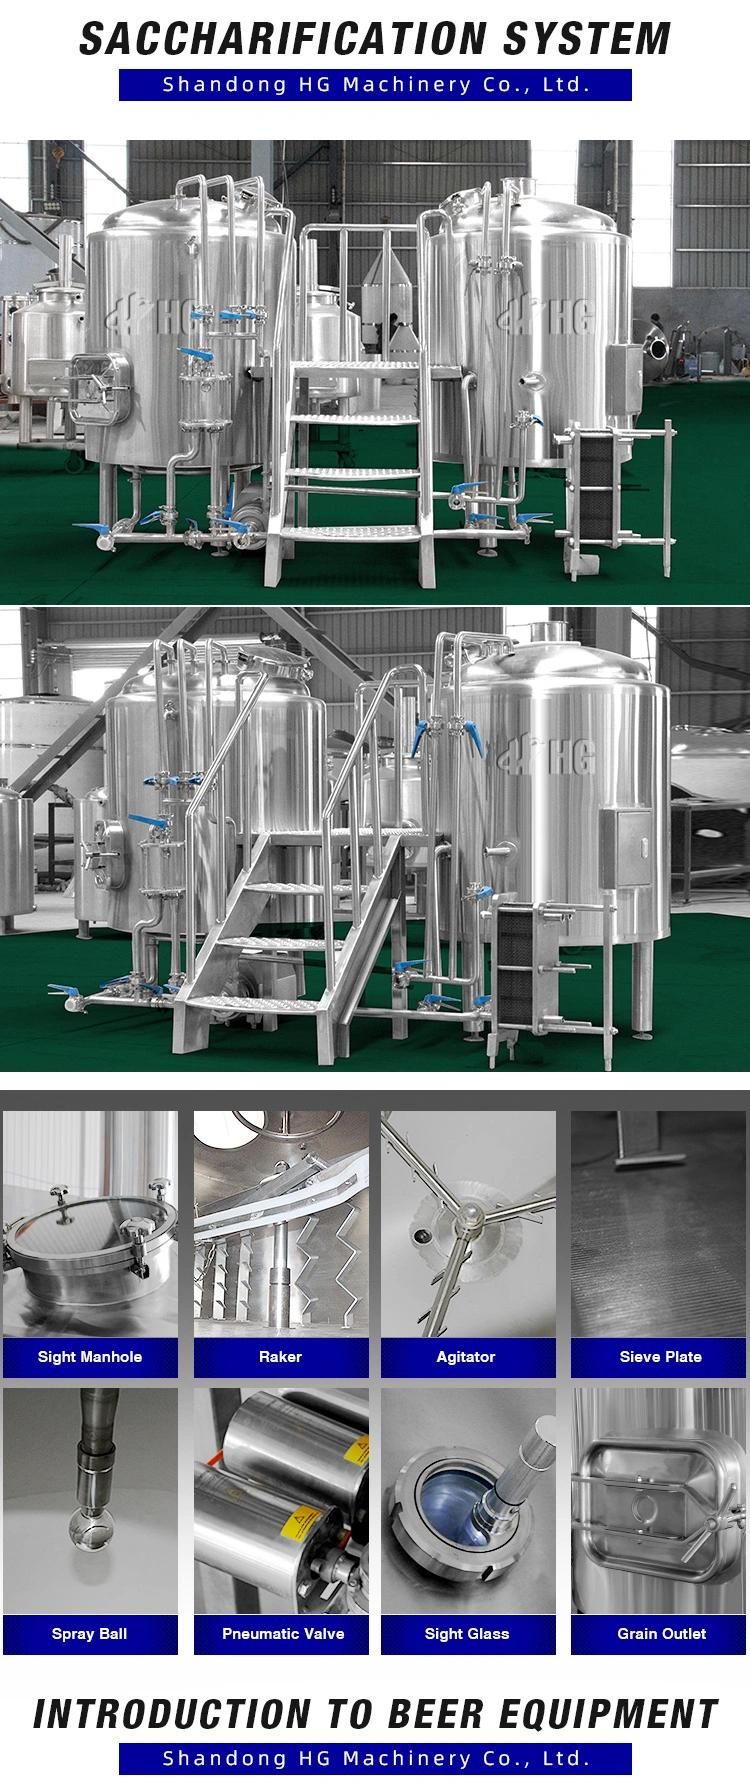 500L SUS Beer Brewery System Mini Brewhouse Tank for Microbrewery